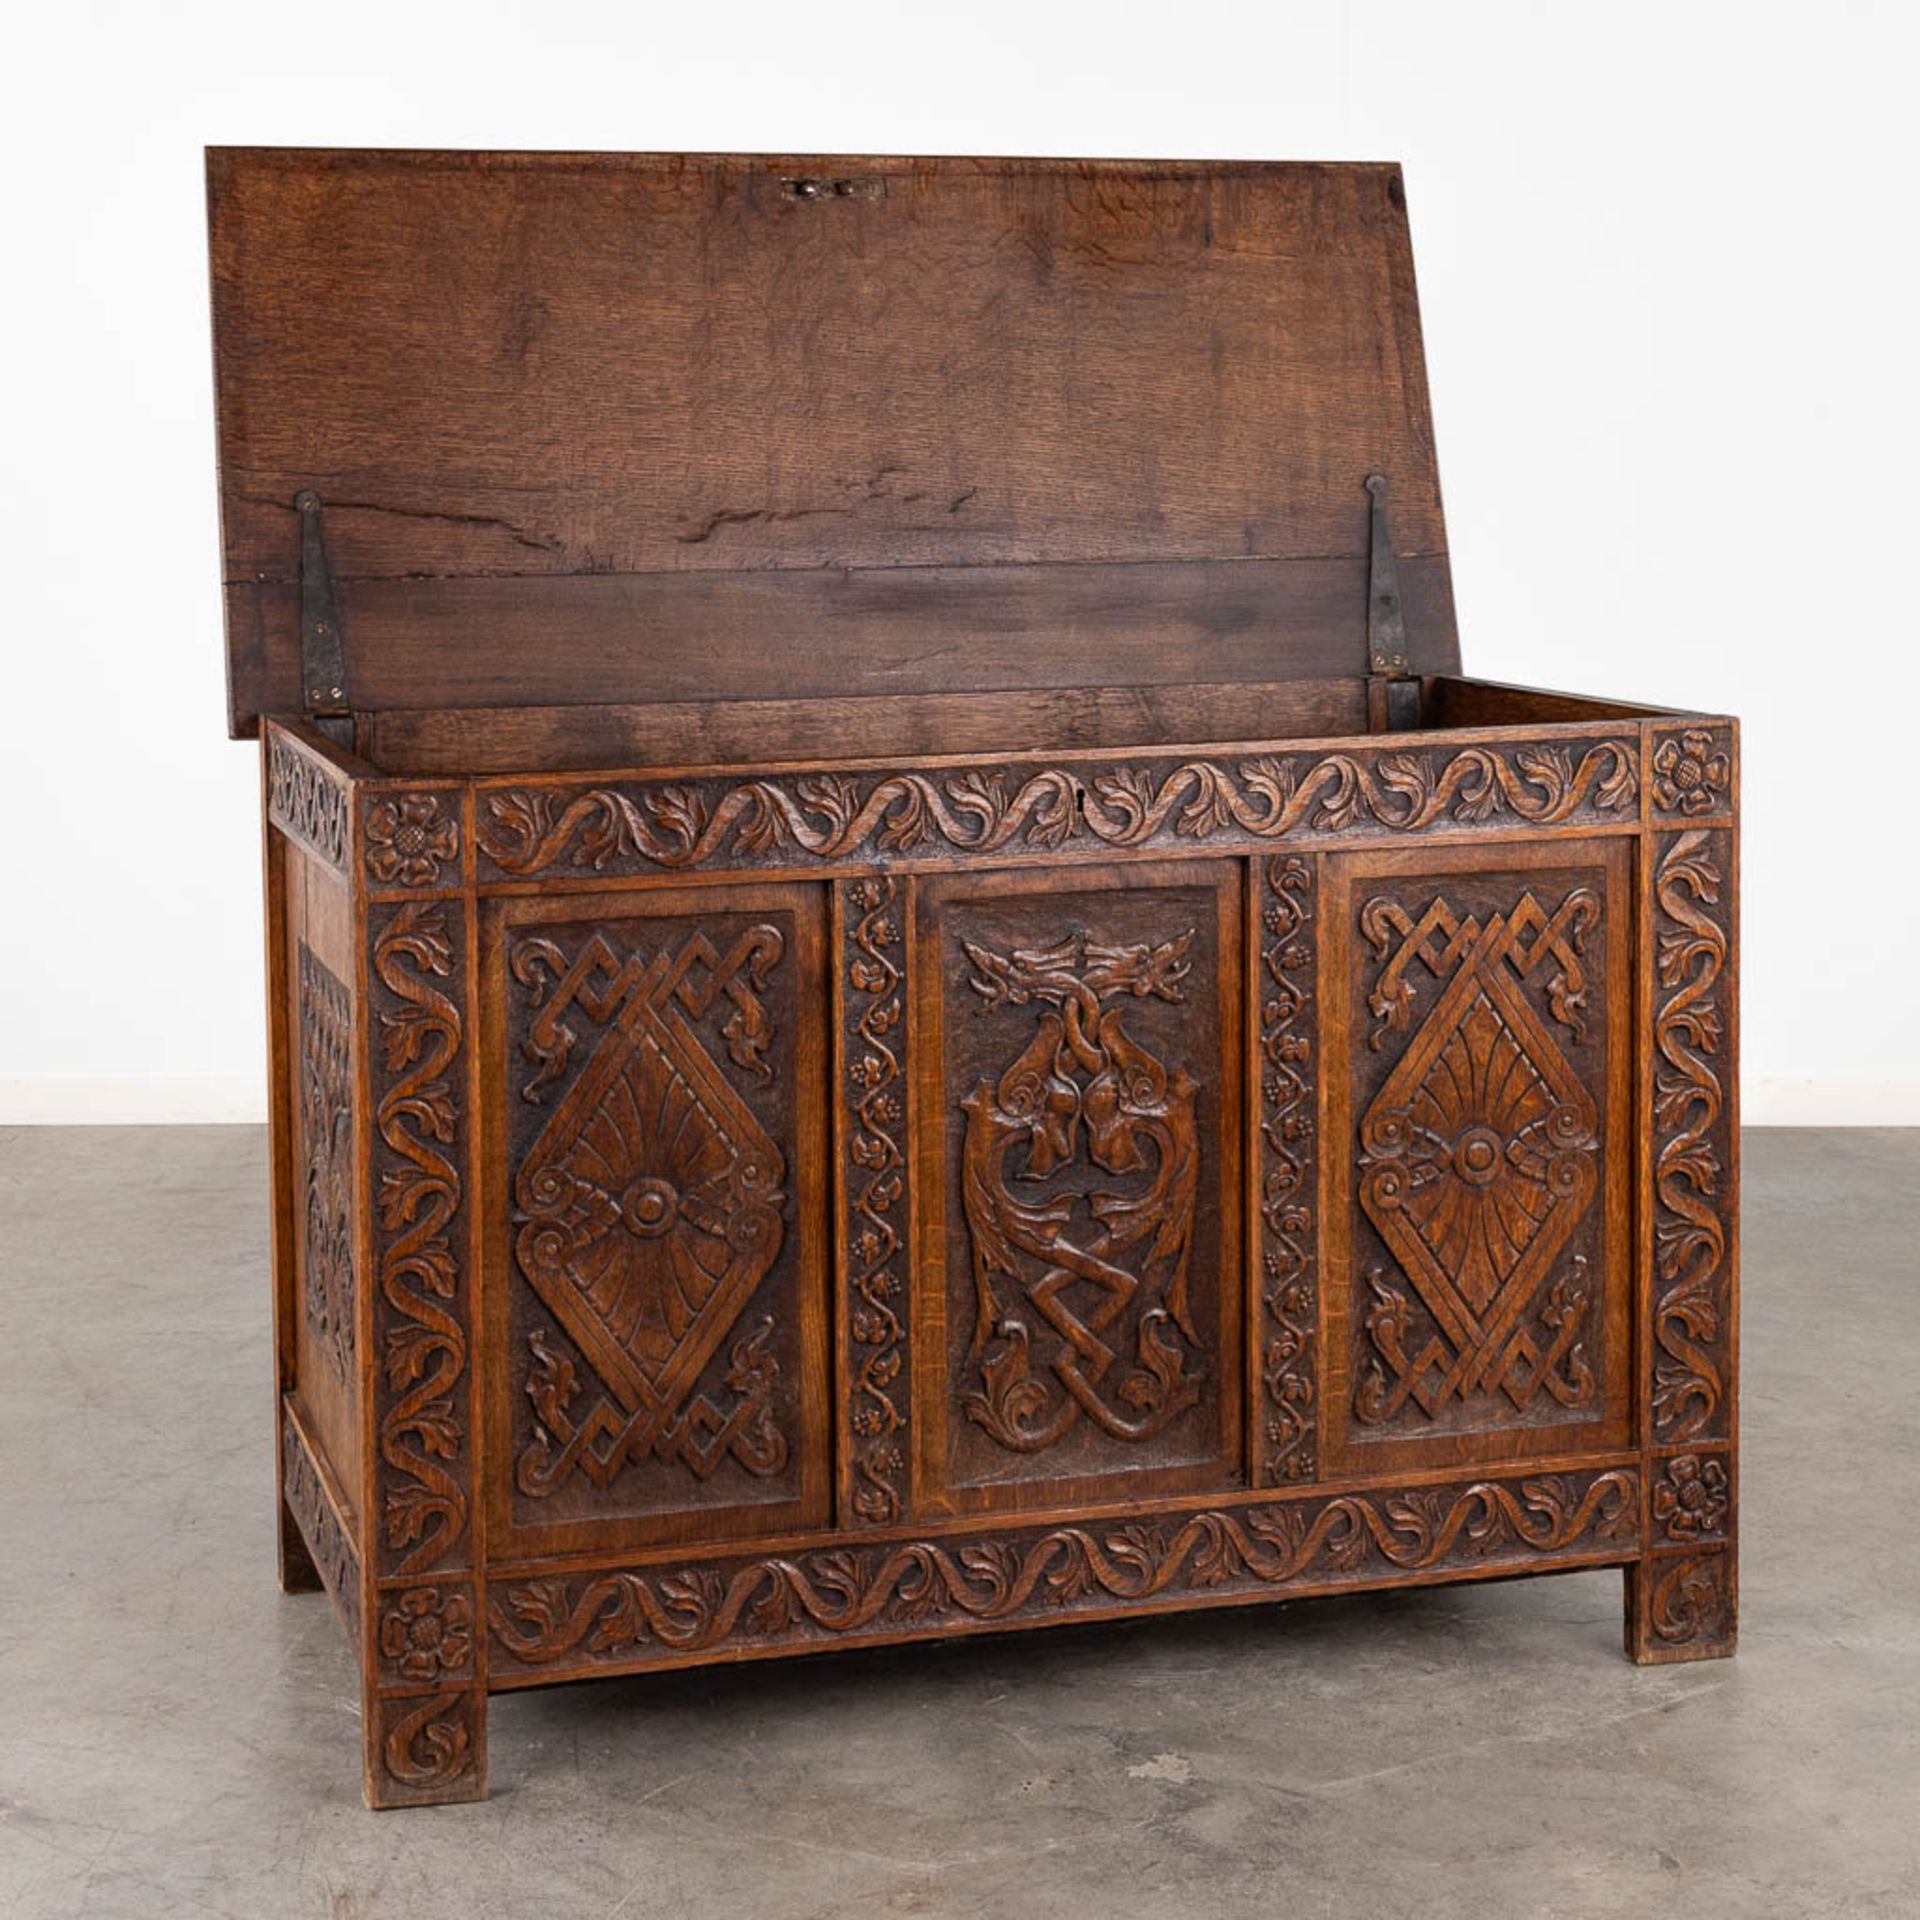 An antique and decorative chest with wood-sculptures. (D:56 x W:122 x H:82 cm) - Image 3 of 15